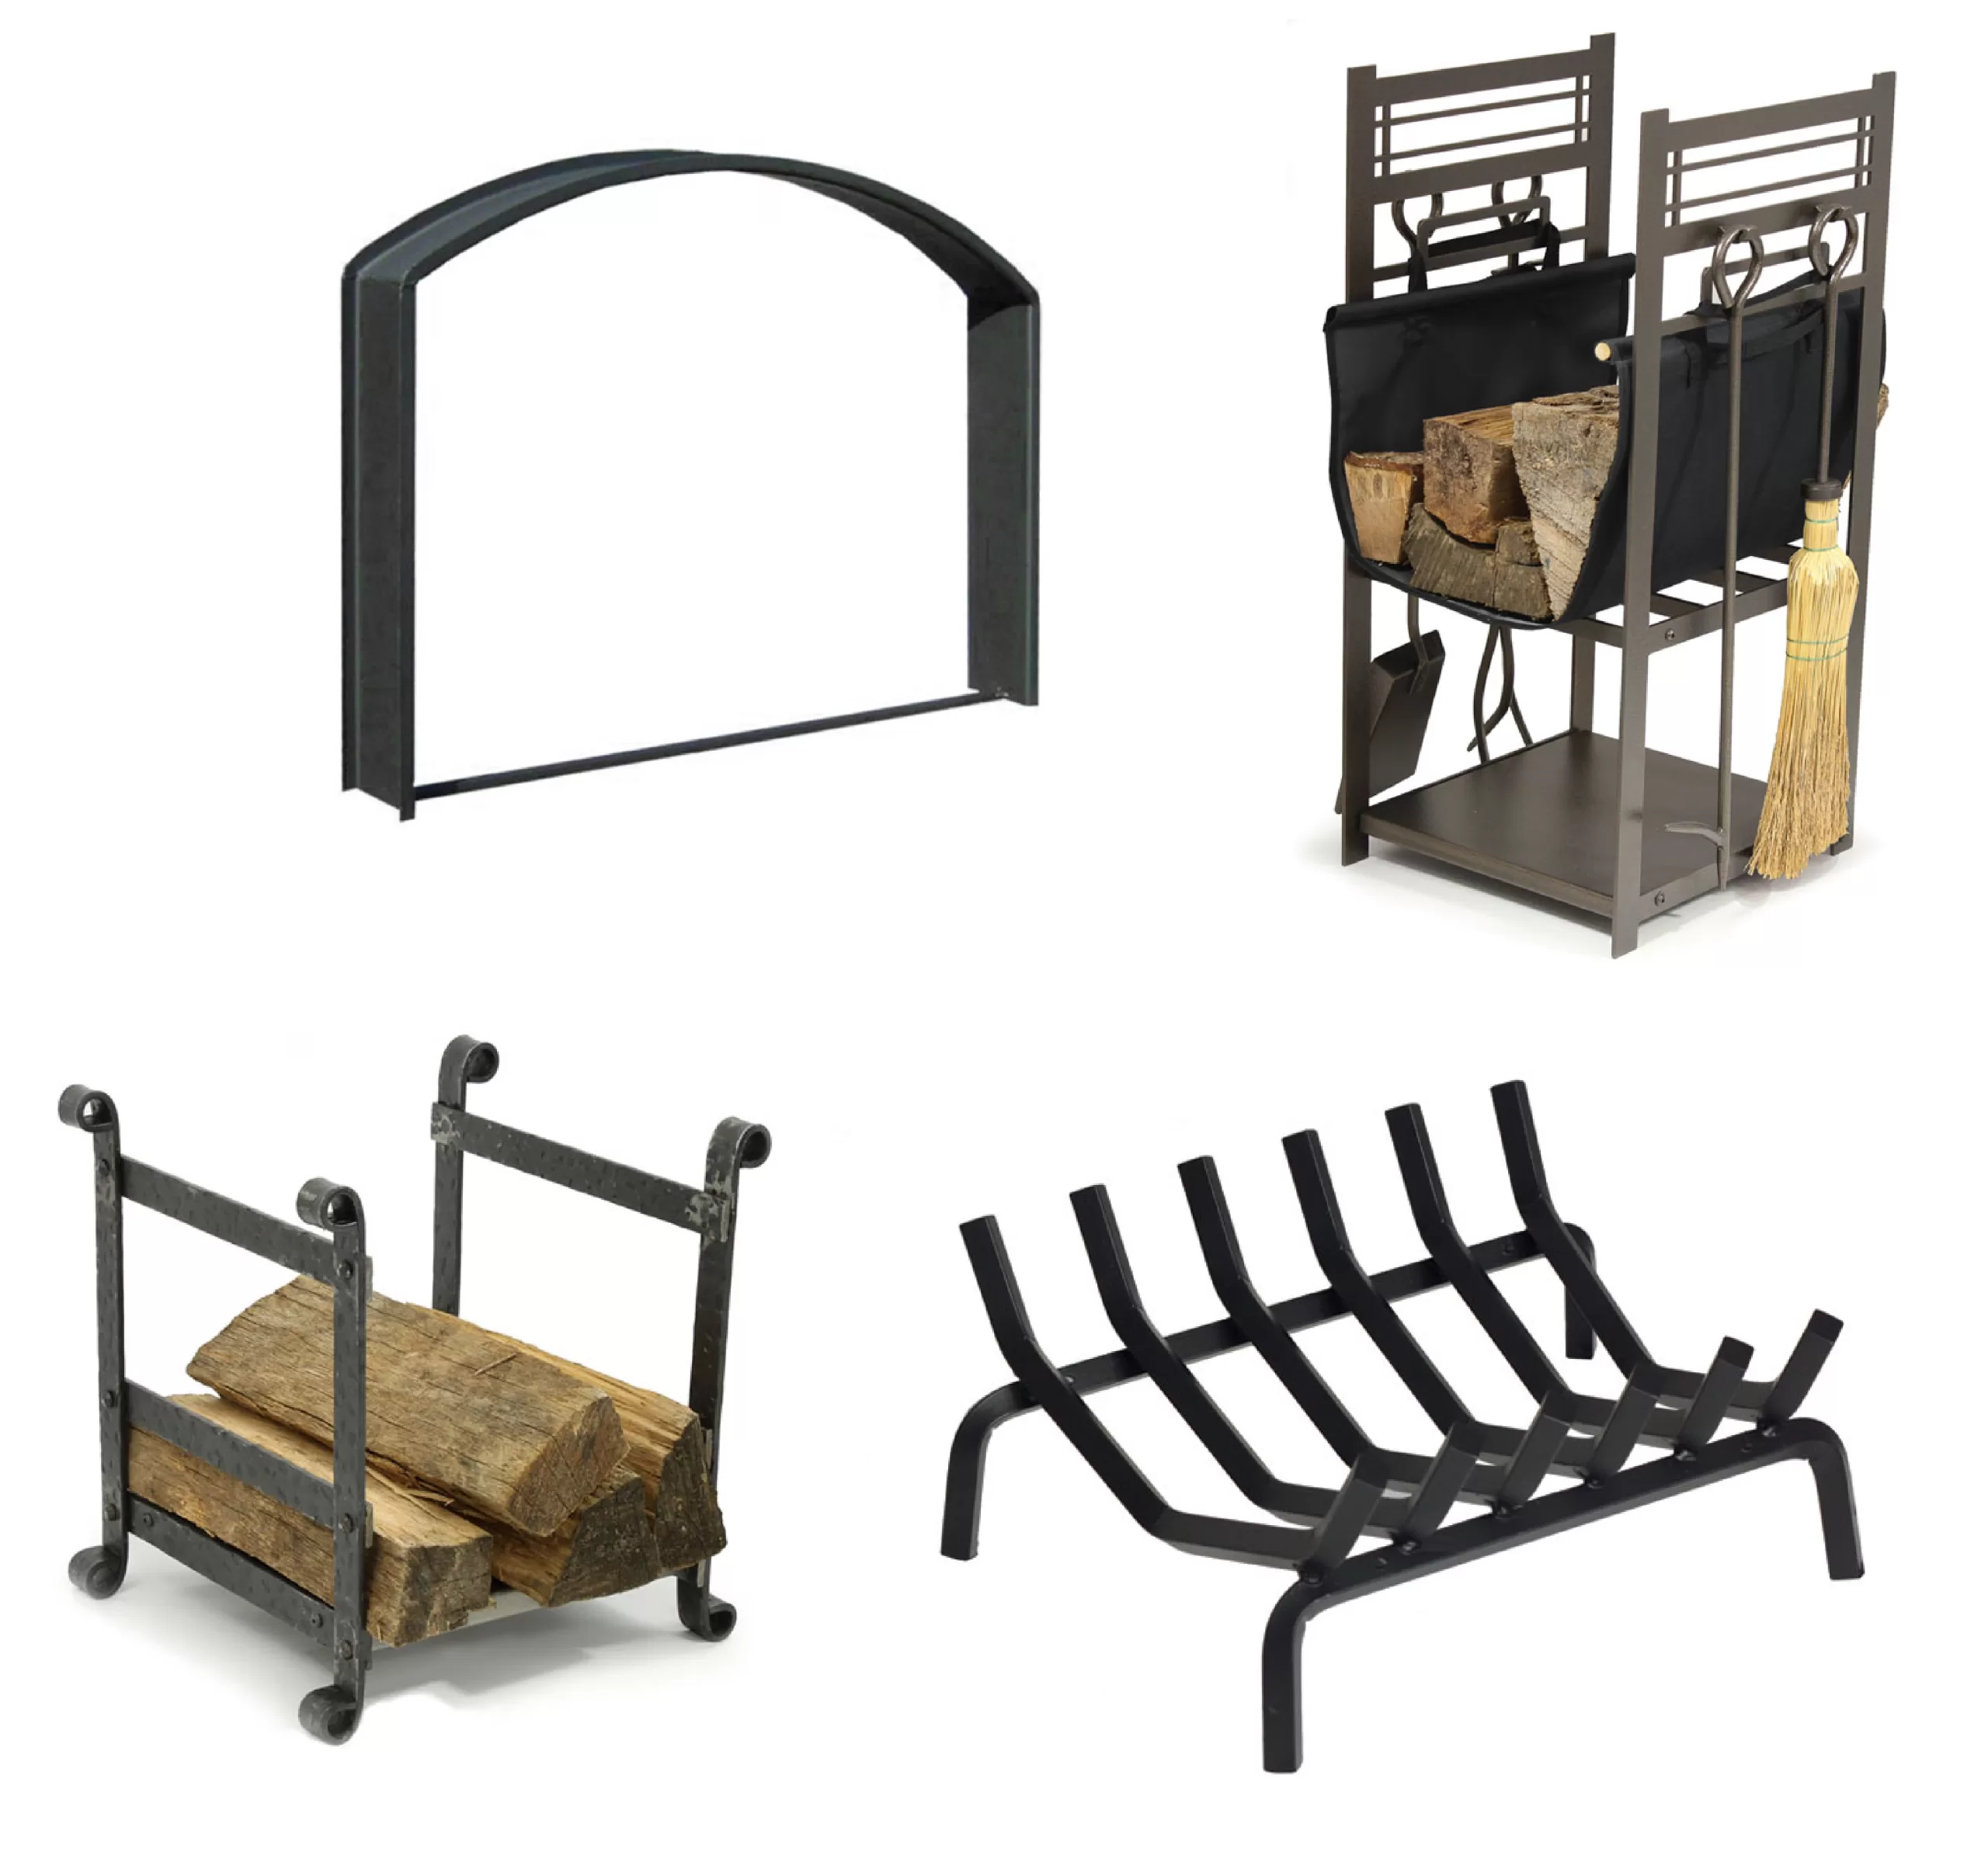 fireplace accessories, log holders, fireplace grates, tool kits, and more.